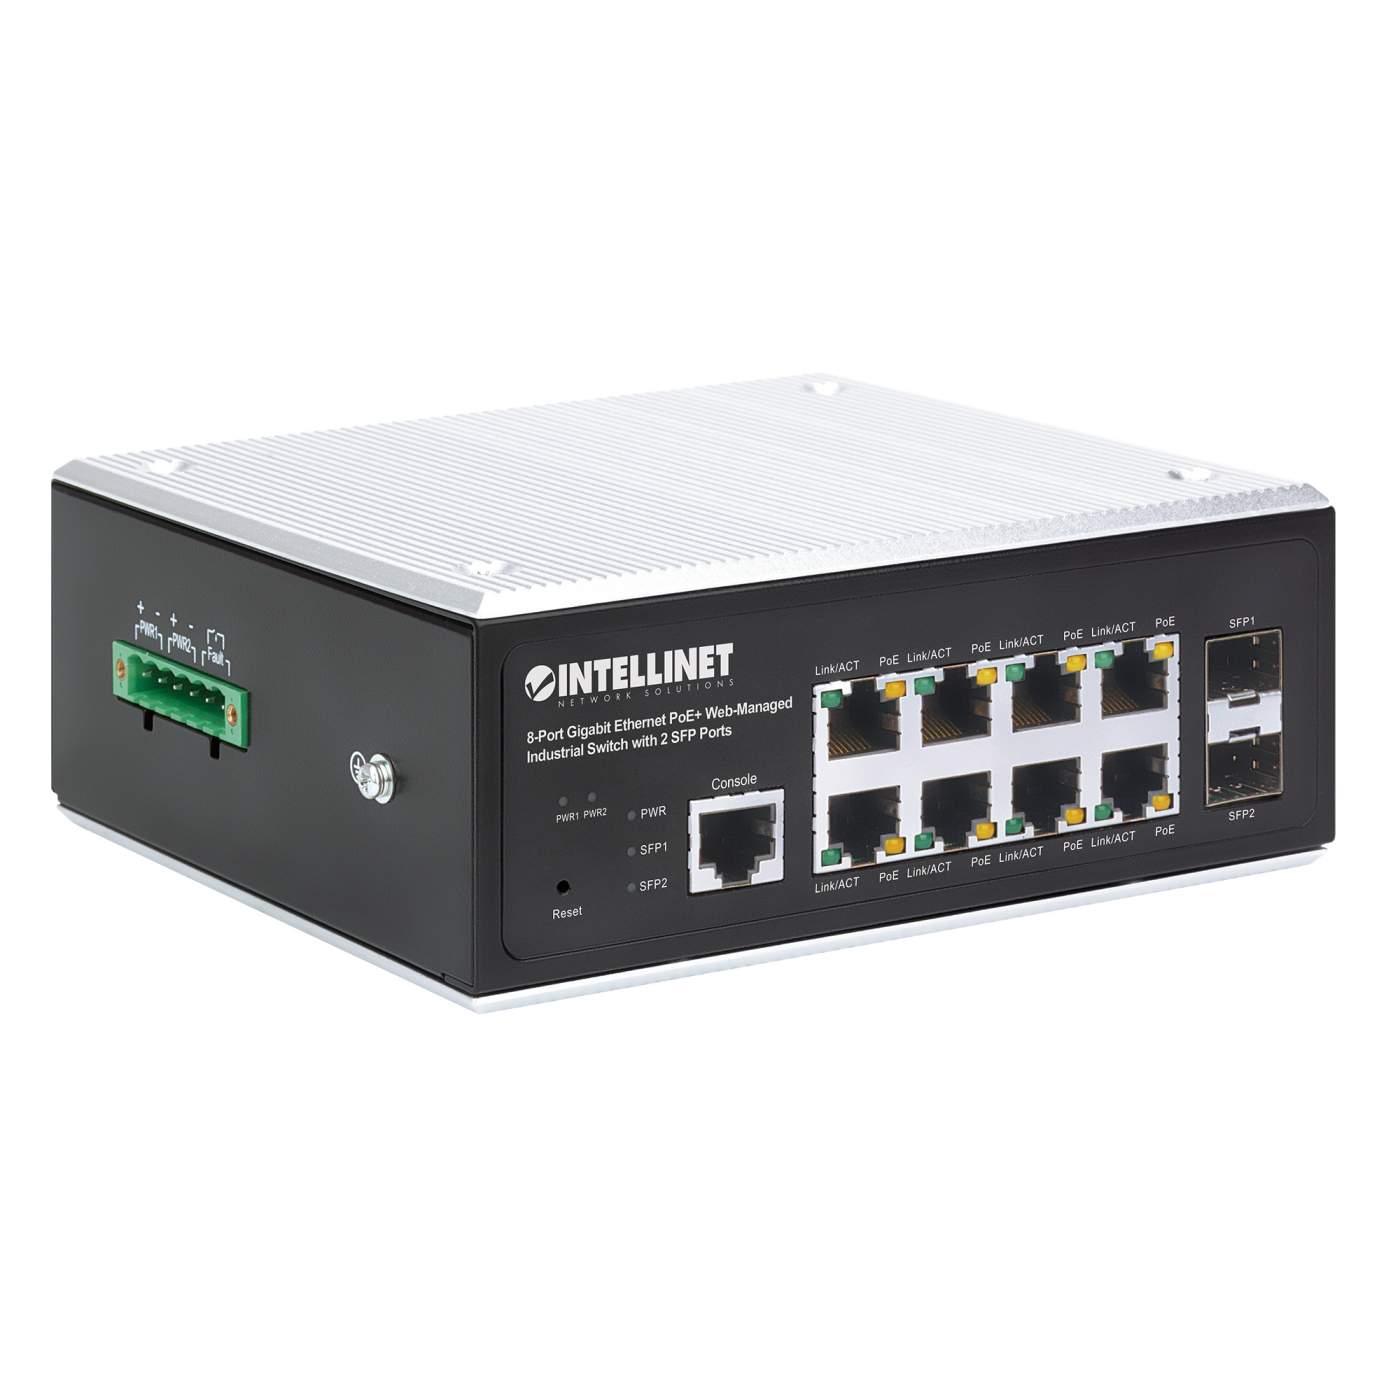 Industrial 8-Port Gigabit Ethernet PoE+ Layer 2+ Web-Managed Switch with 2 SFP Ports Image 2